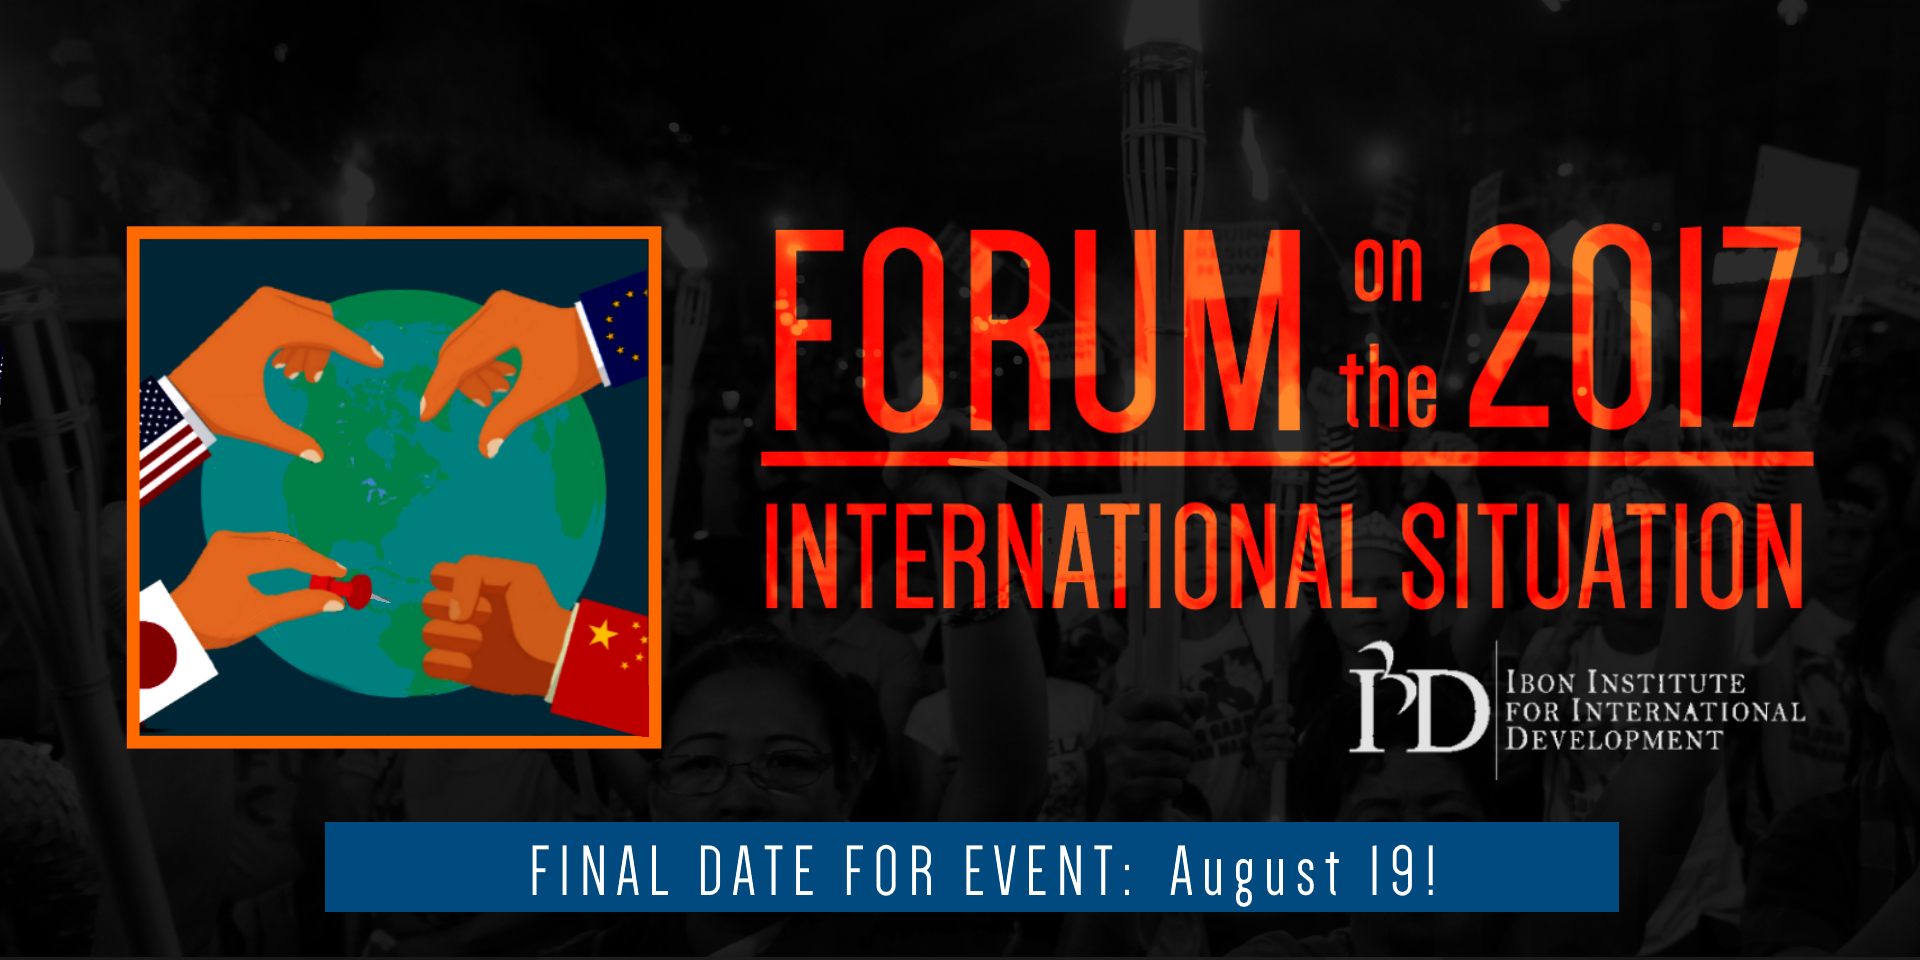 Forum on the 2017 International Situation